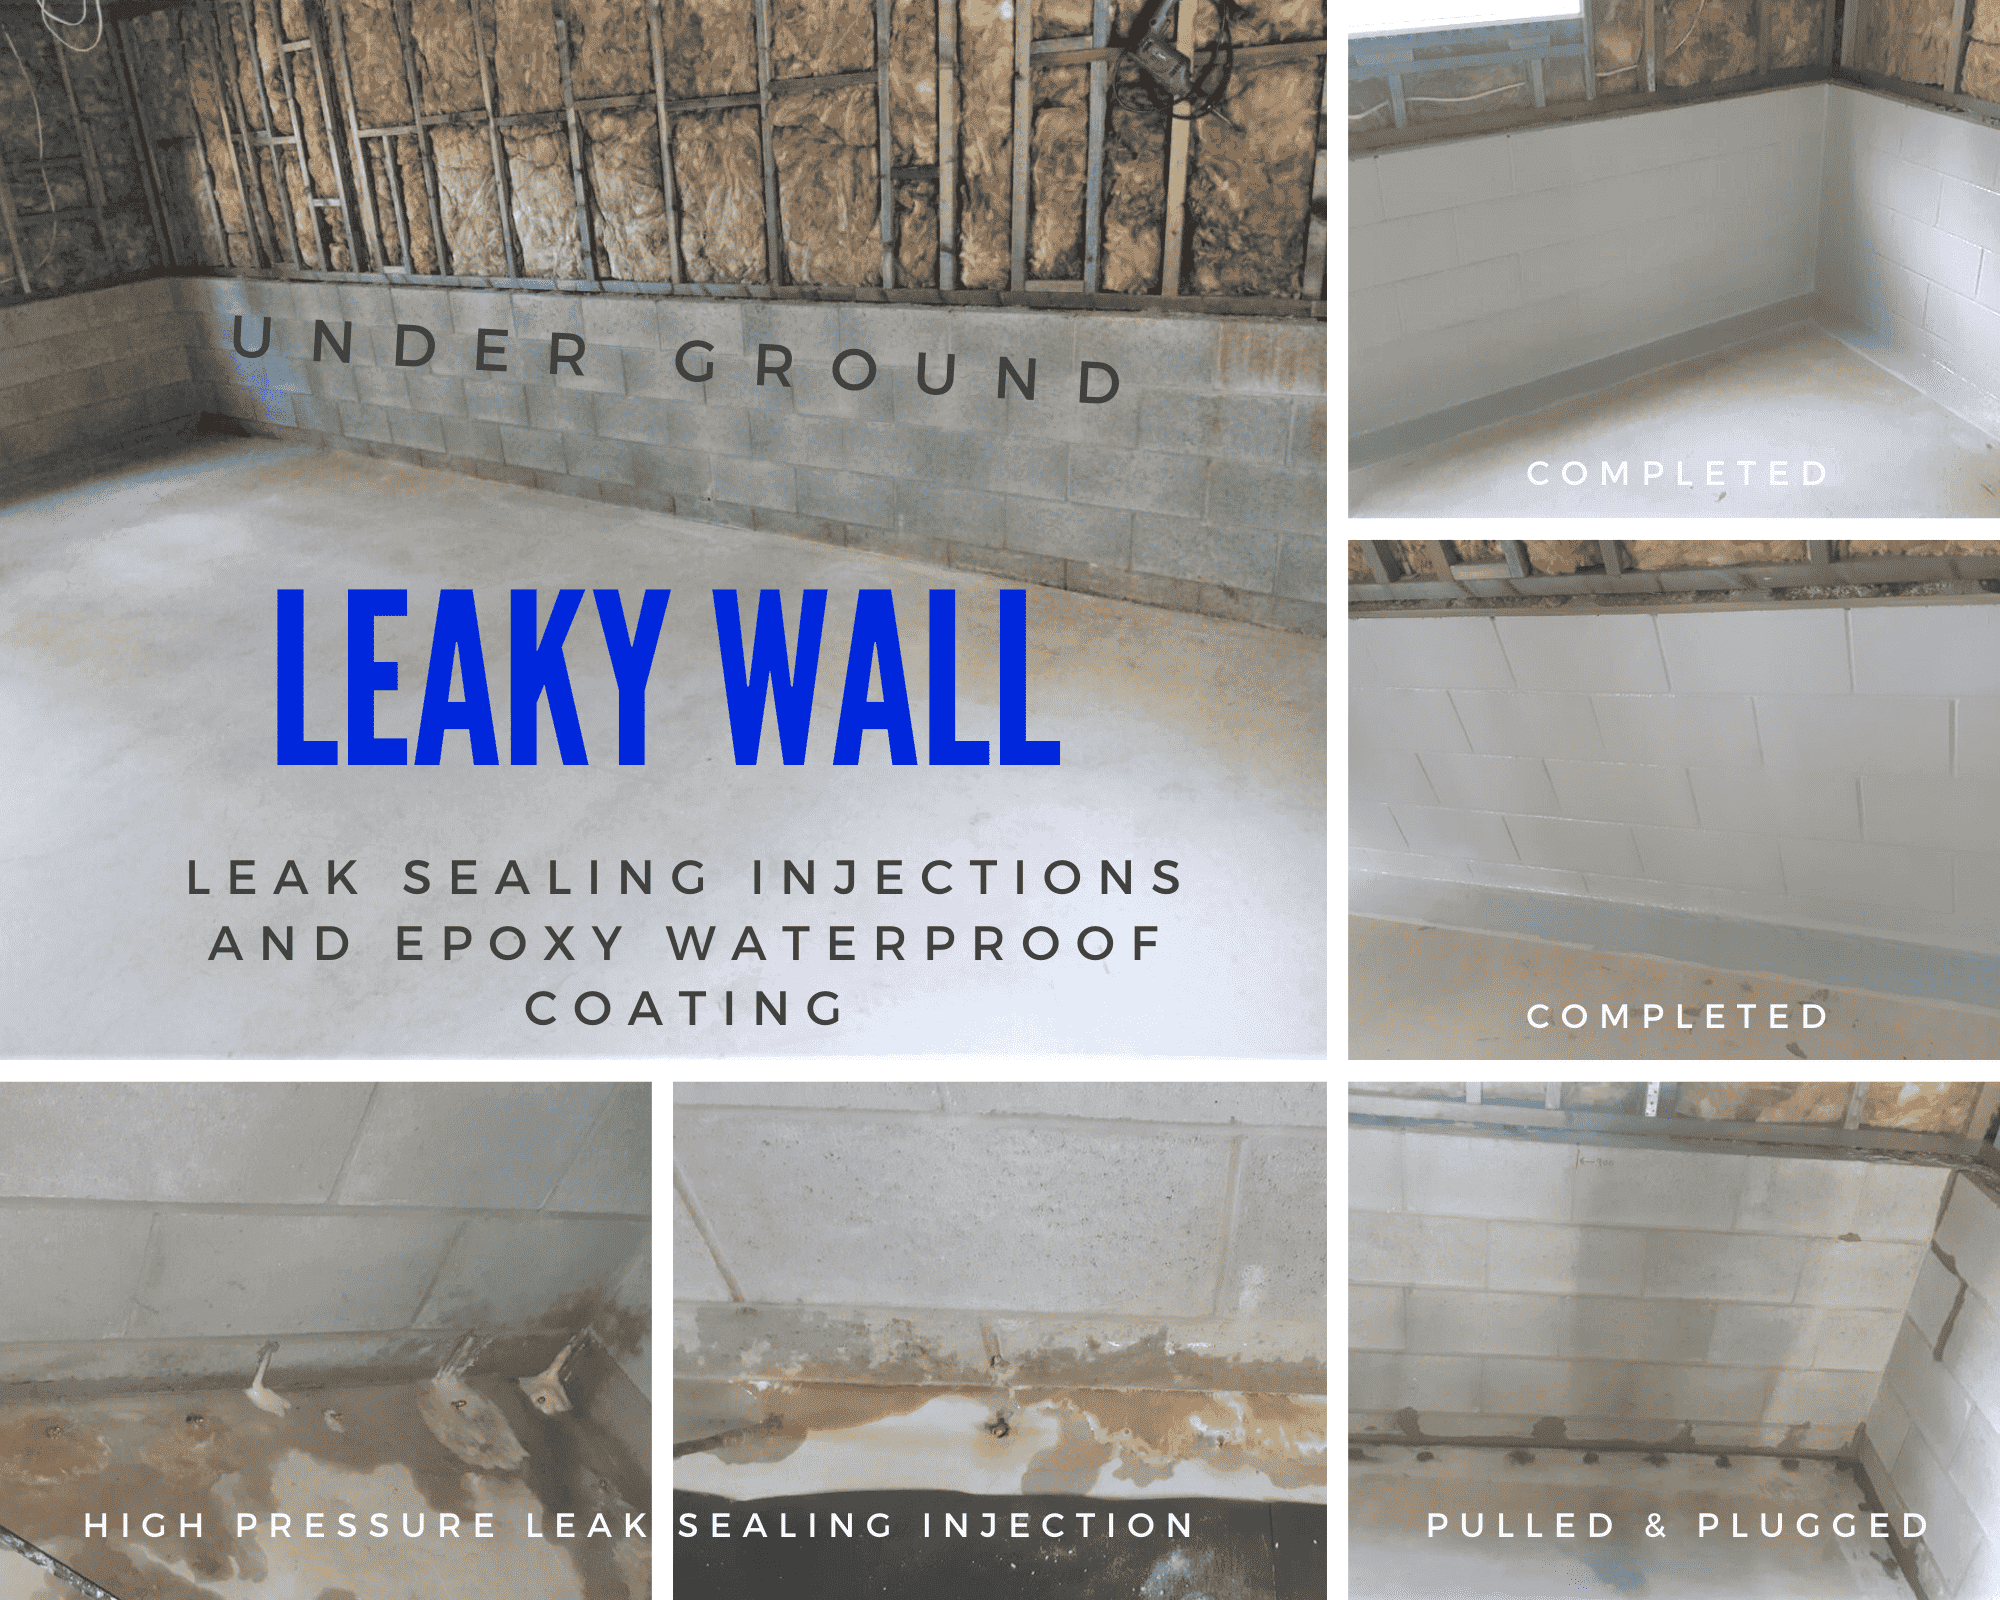 Leaky wall - water ingress through wall to floor joint - leak sealing by Waterstop Solutions